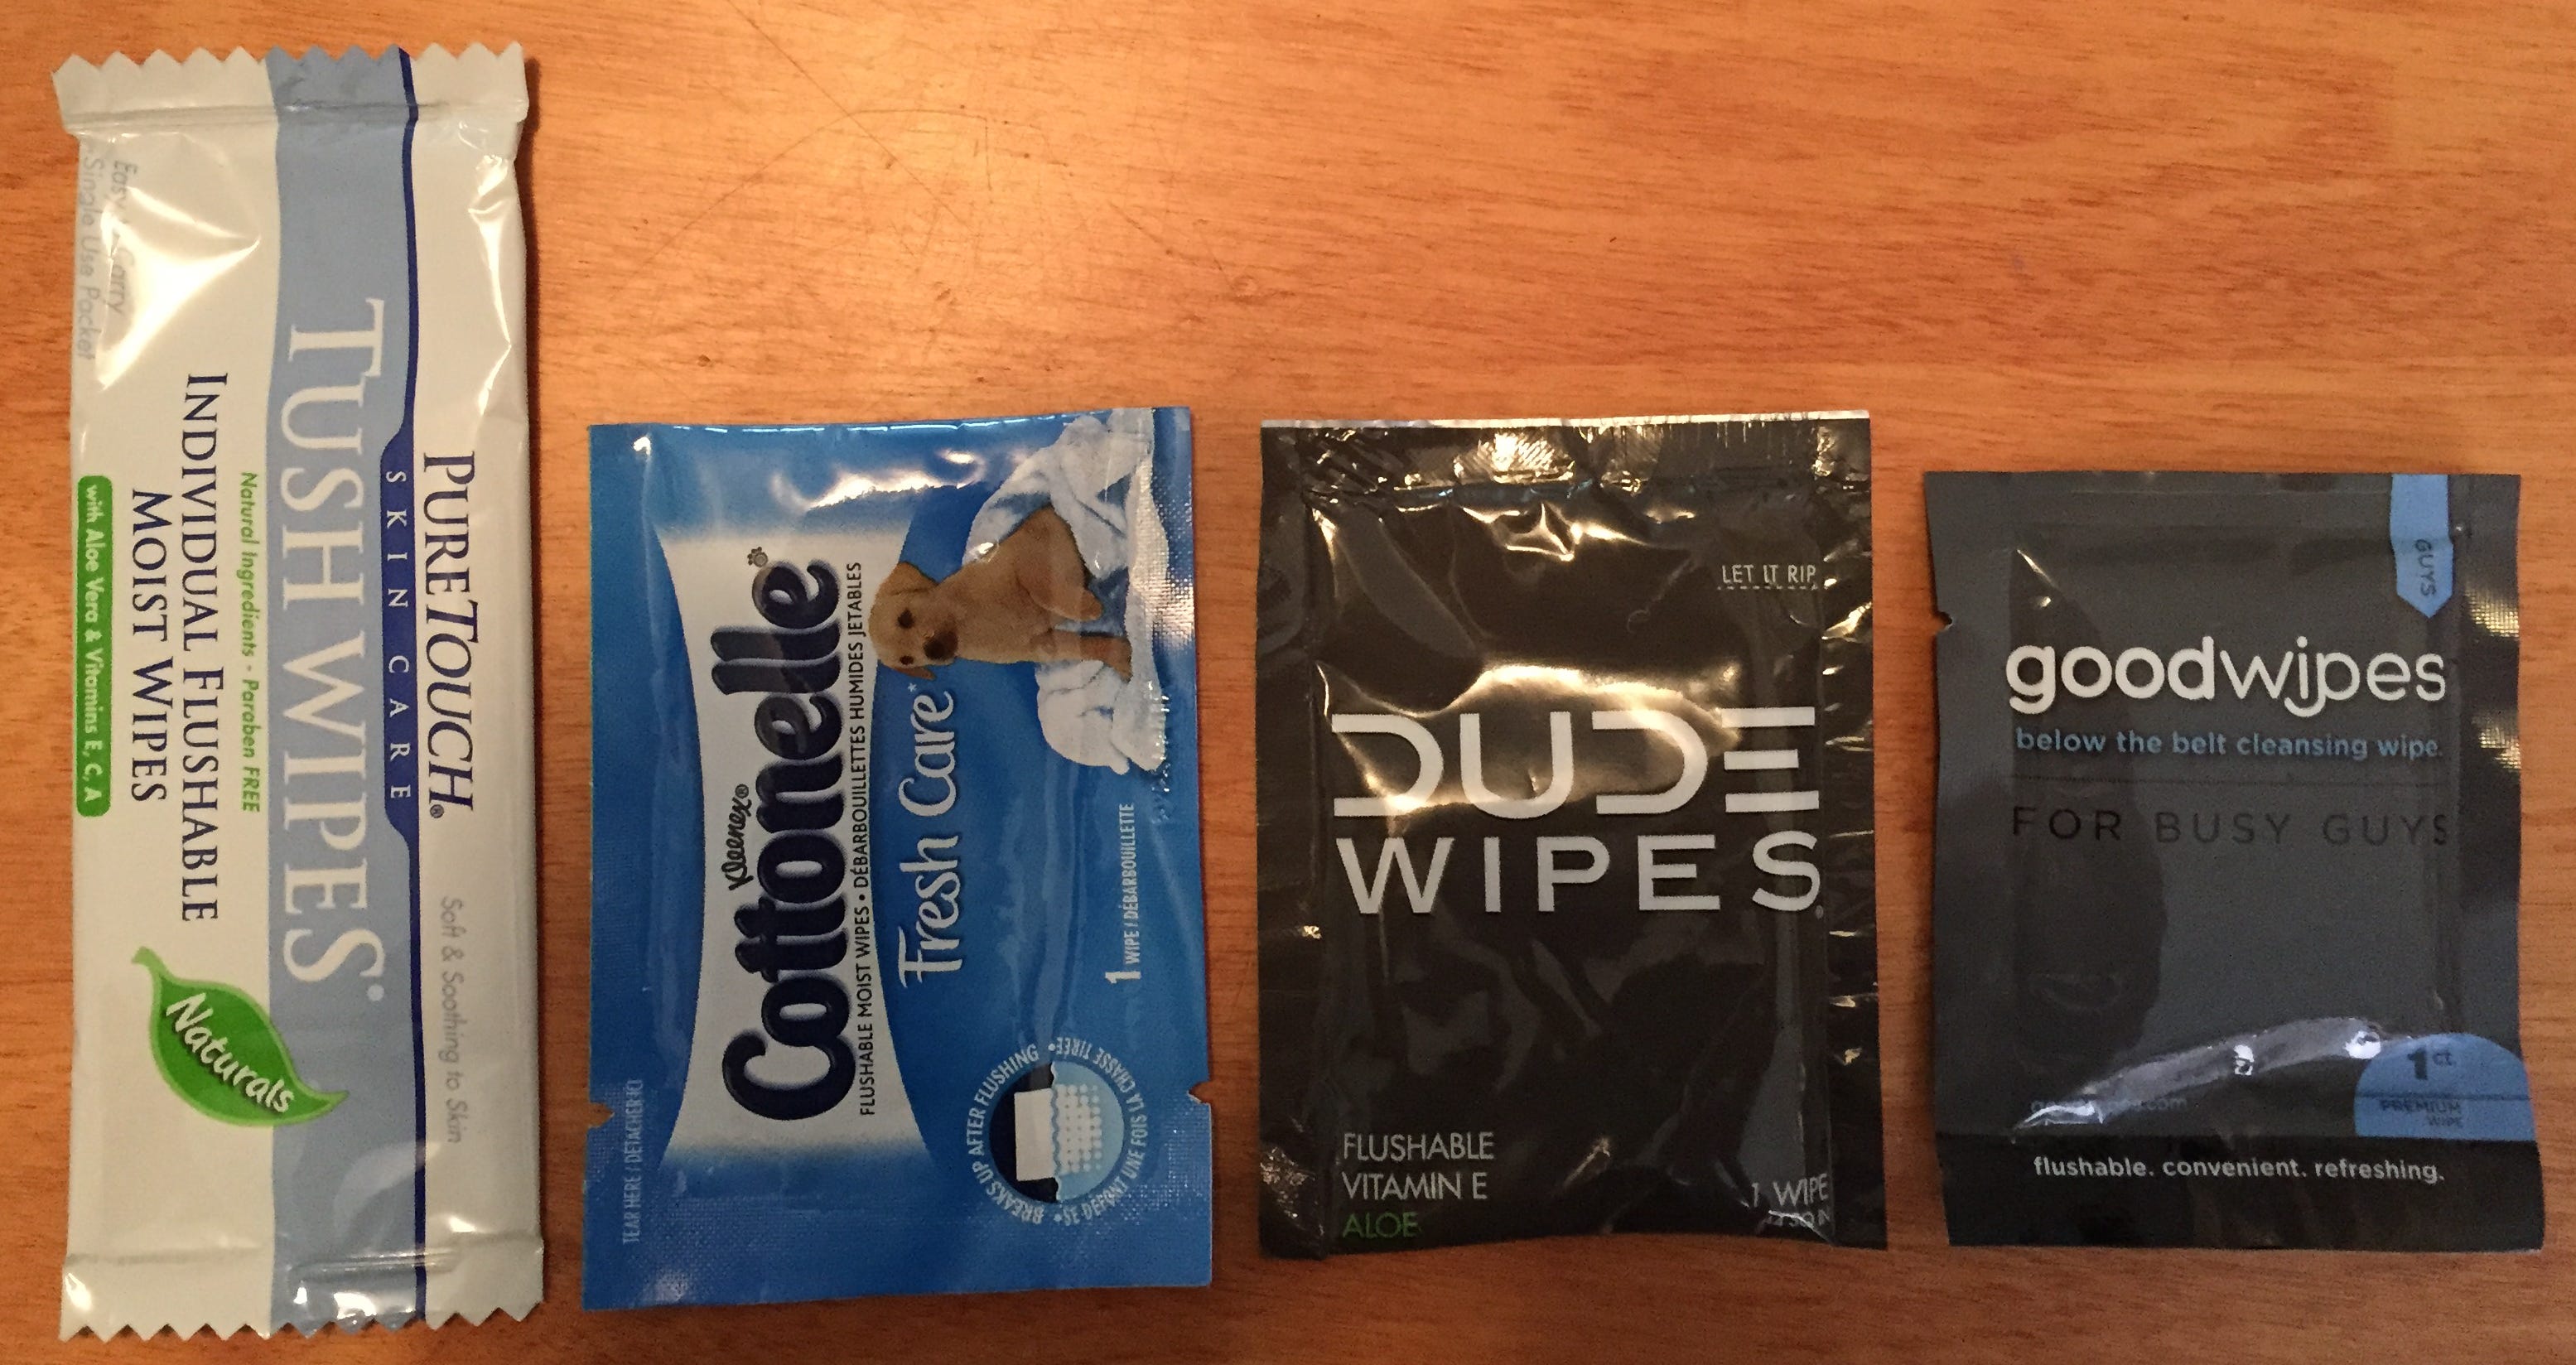 Which Single-Use Butt Wipe Brand is the Best?, by Adam Gerard